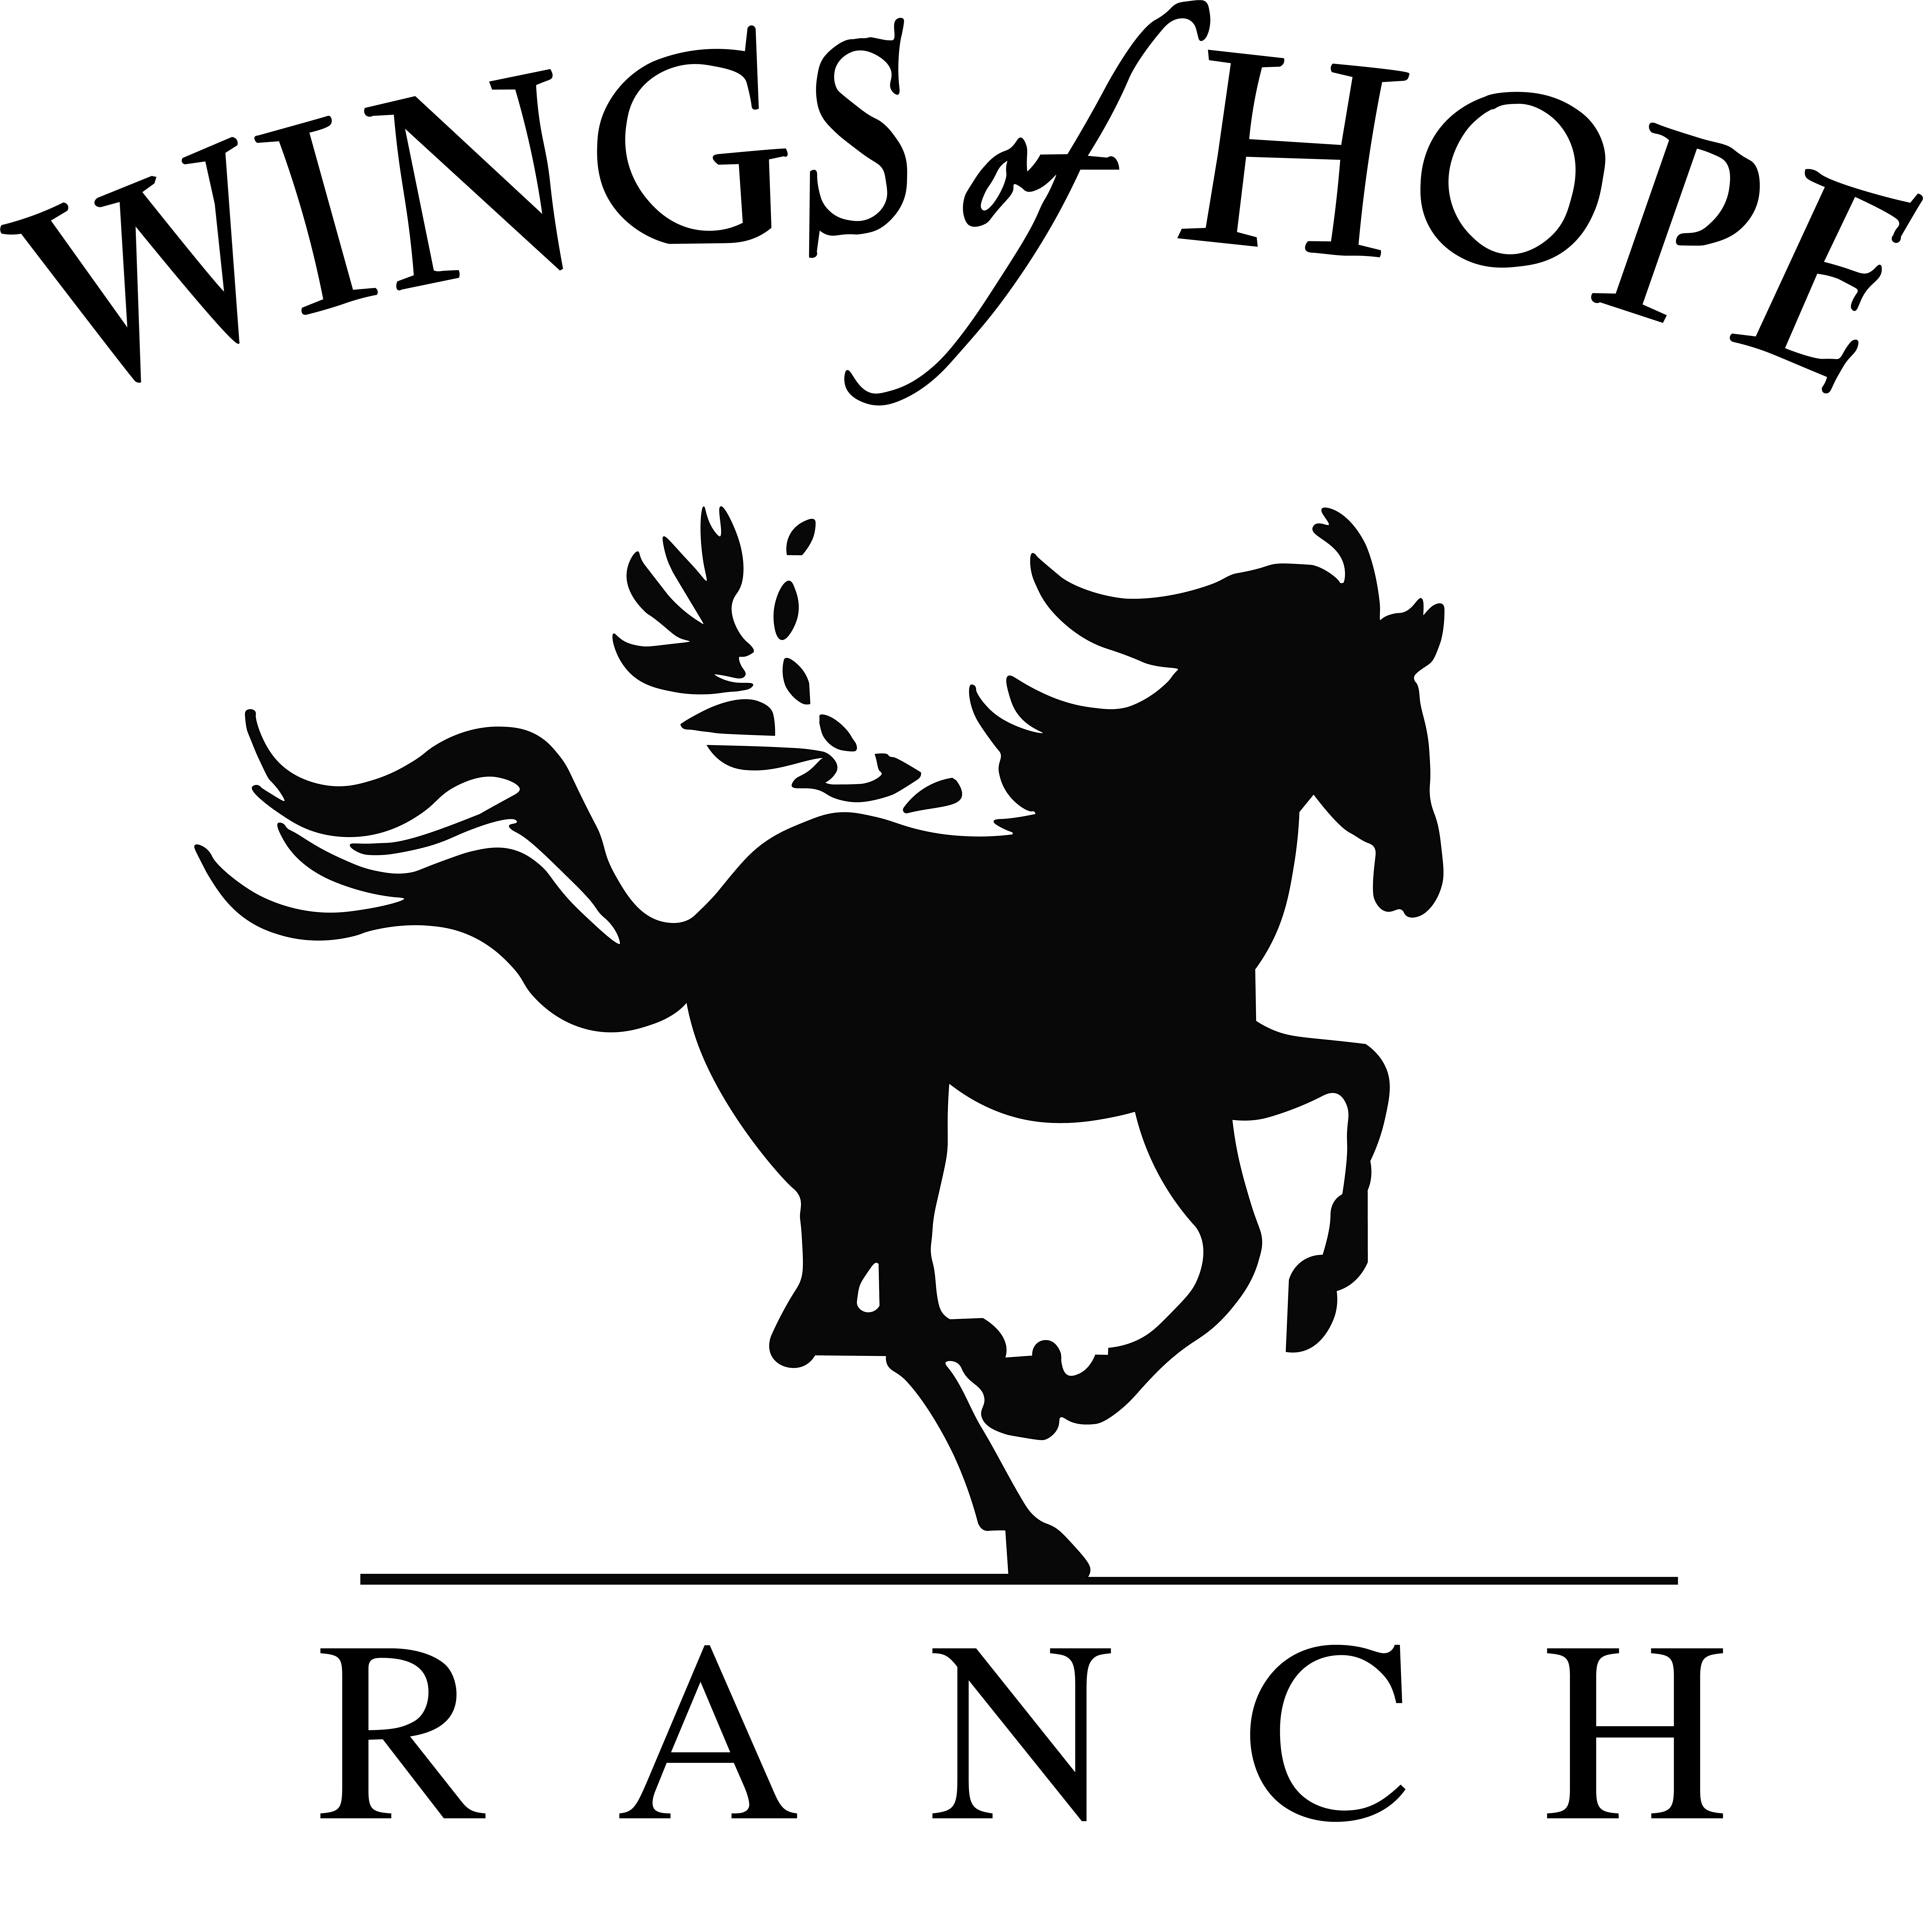 https://www.synapsehubs.com/wp-content/uploads/2022/05/Wings-of-Hope-black-horse-transperent-background.png